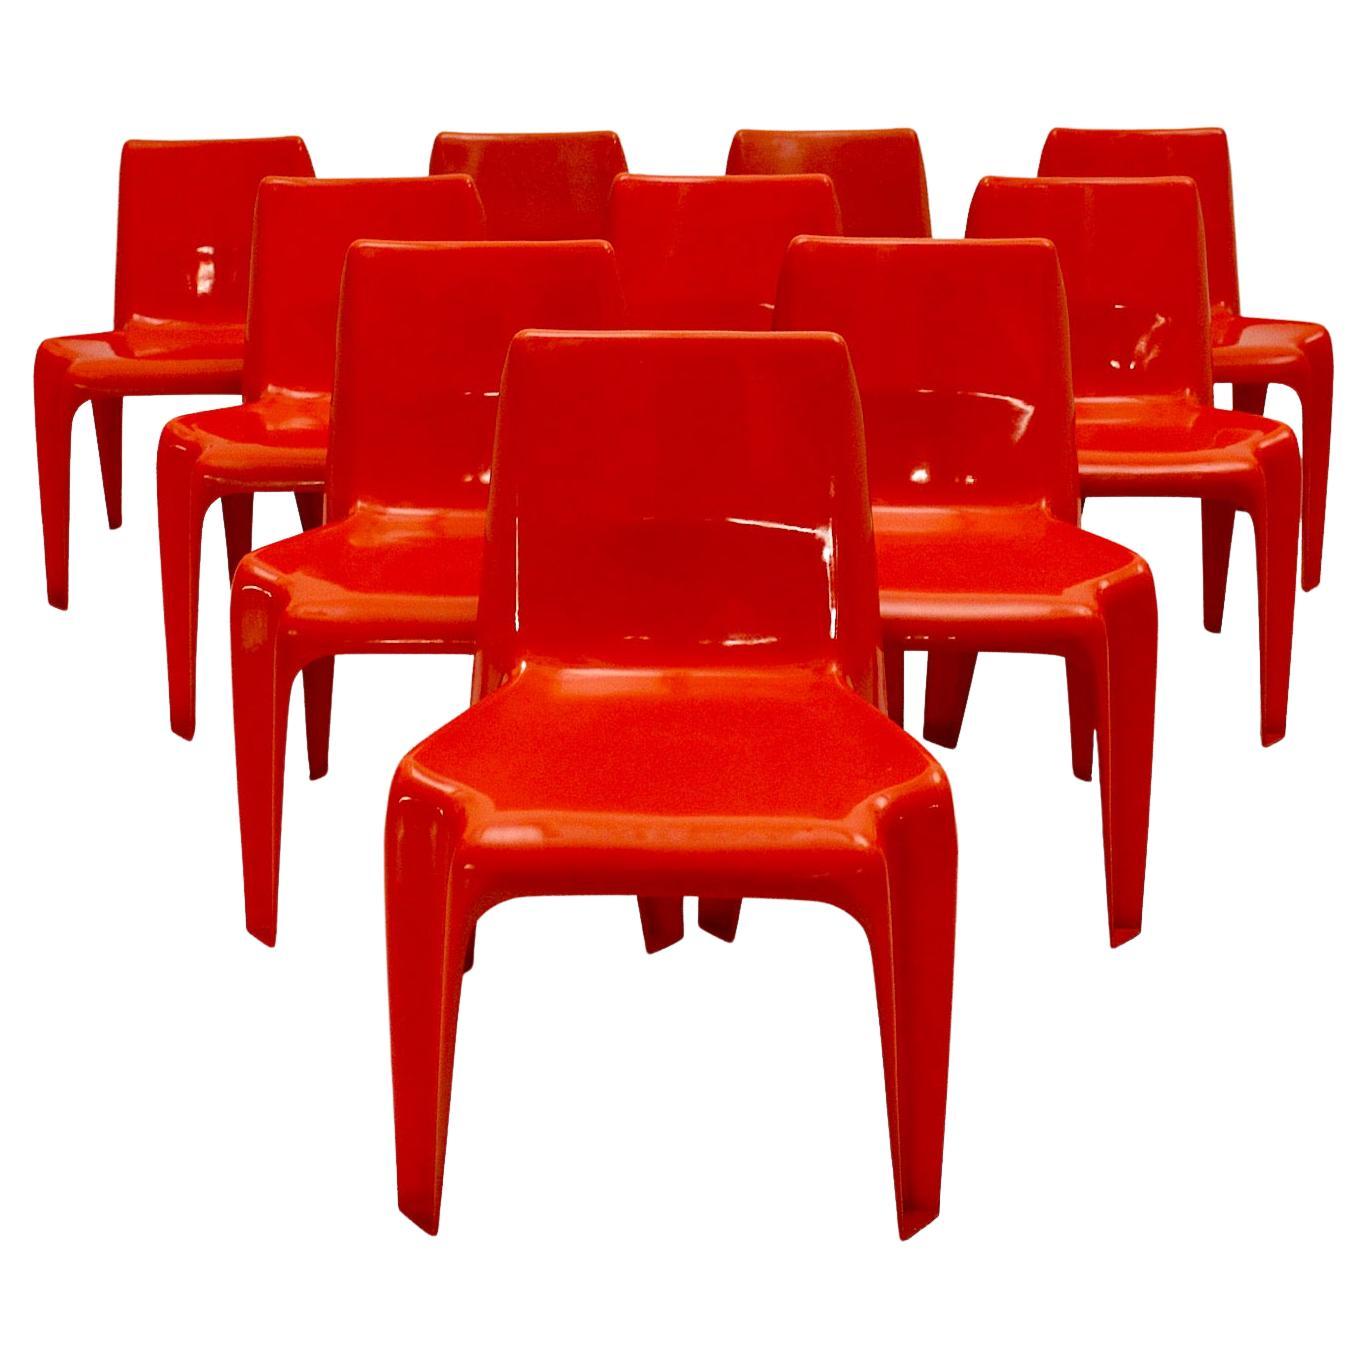 Space Age Vintage Ten Red Plastic Dining Chairs Helmut Baetzner Bofinger, 1964 For Sale